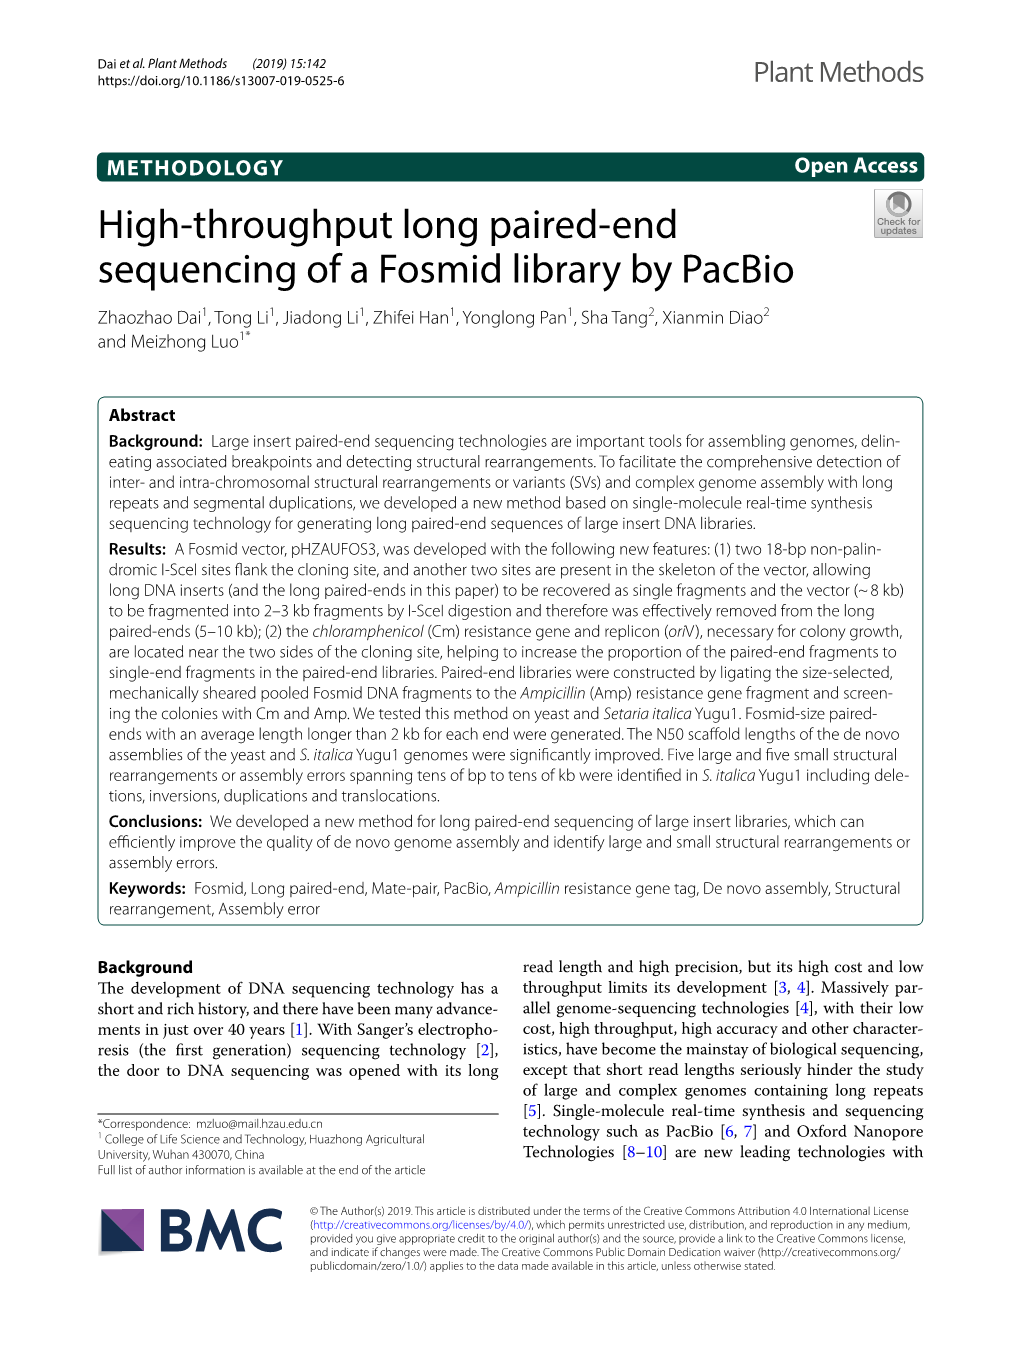 High-Throughput Long Paired-End Sequencing of a Fosmid Library By